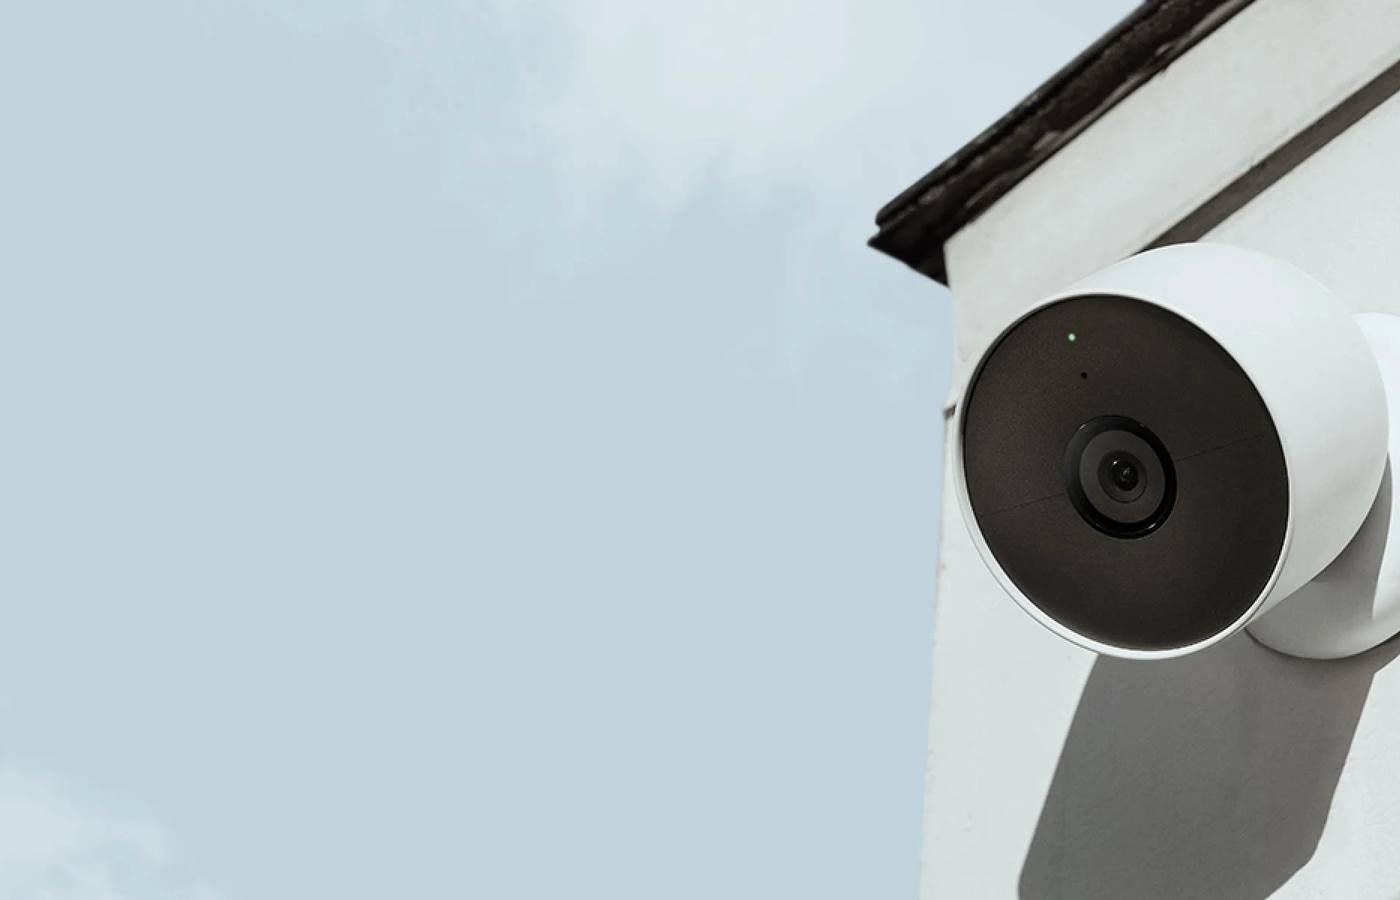 Can Nest Cameras Work Without WiFi?